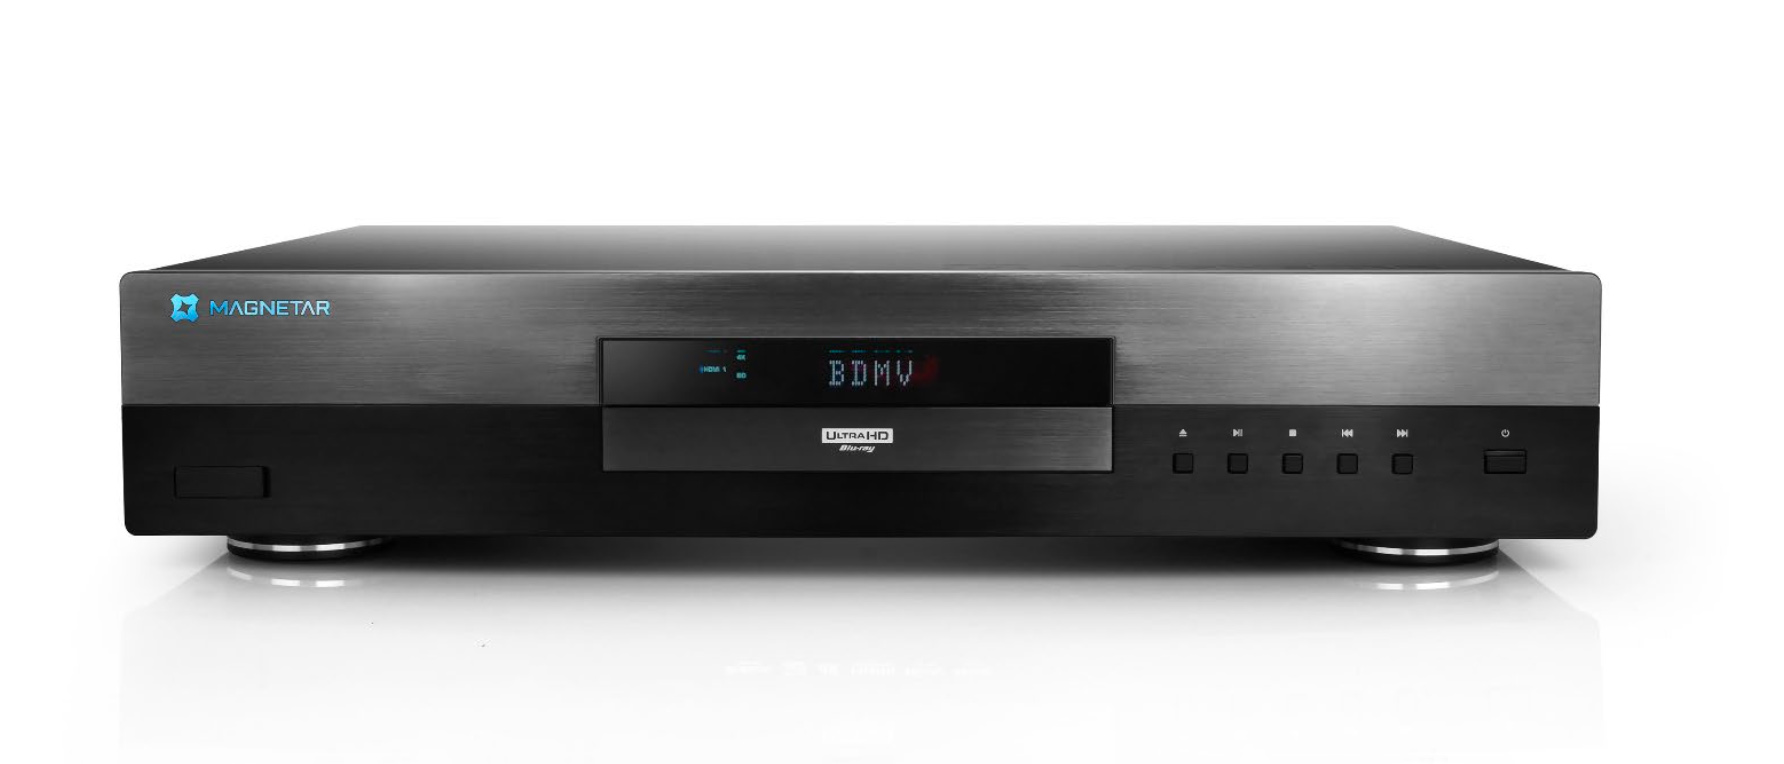 Two new UHD Blu-ray players from newcomer Reavon launching in April -  FlatpanelsHD